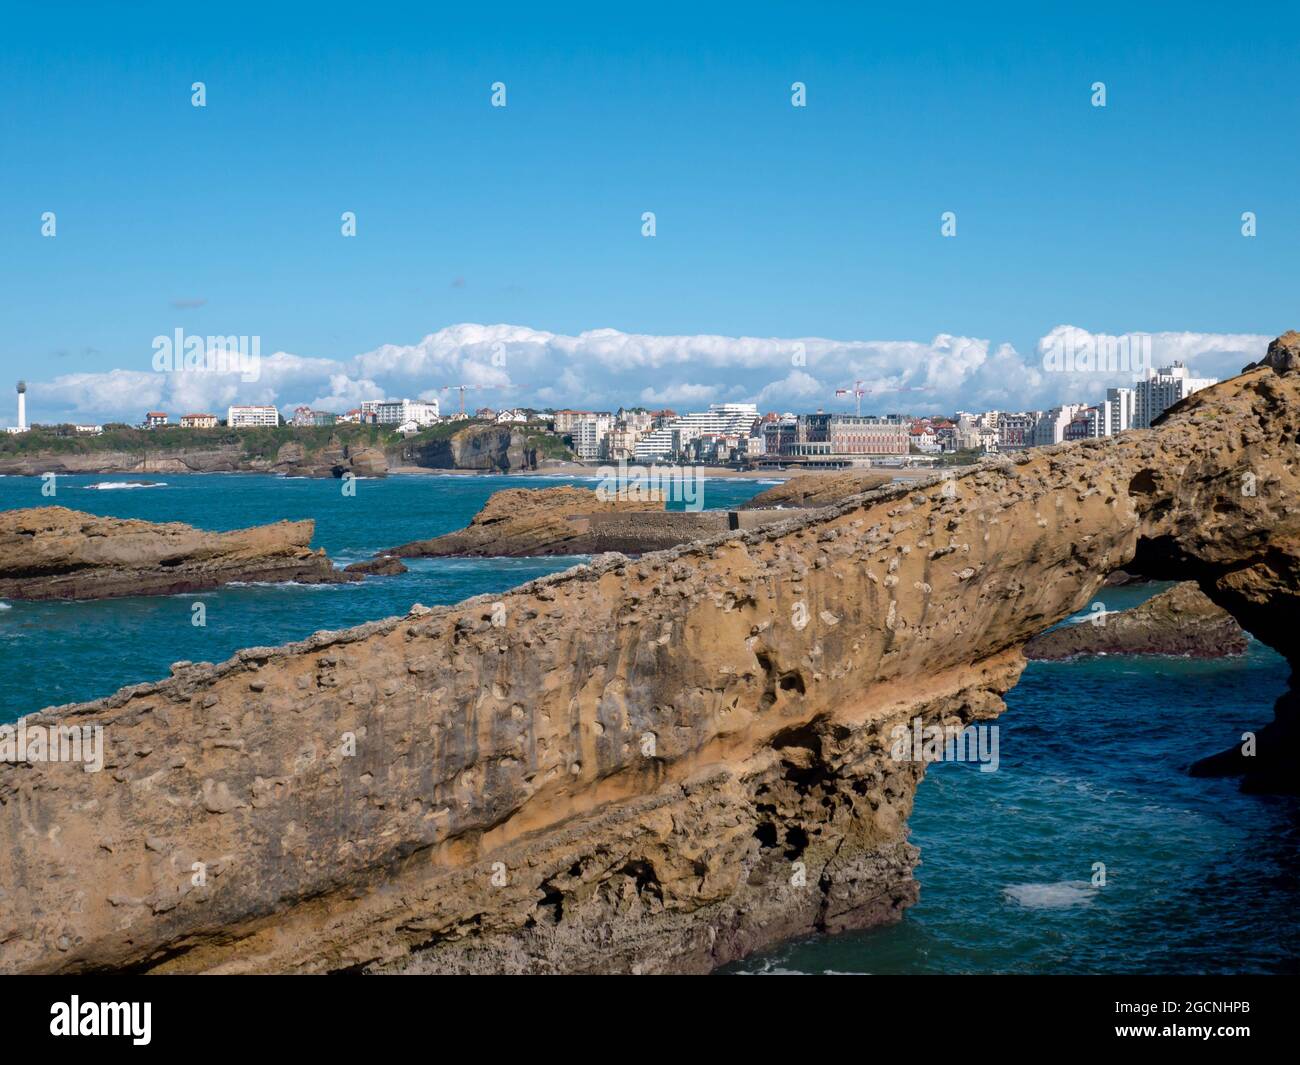 BIARRITZ, FRANCE - October 10, 2020:  View of the city from the coastal rocks, Biarritz, France. Stock Photo